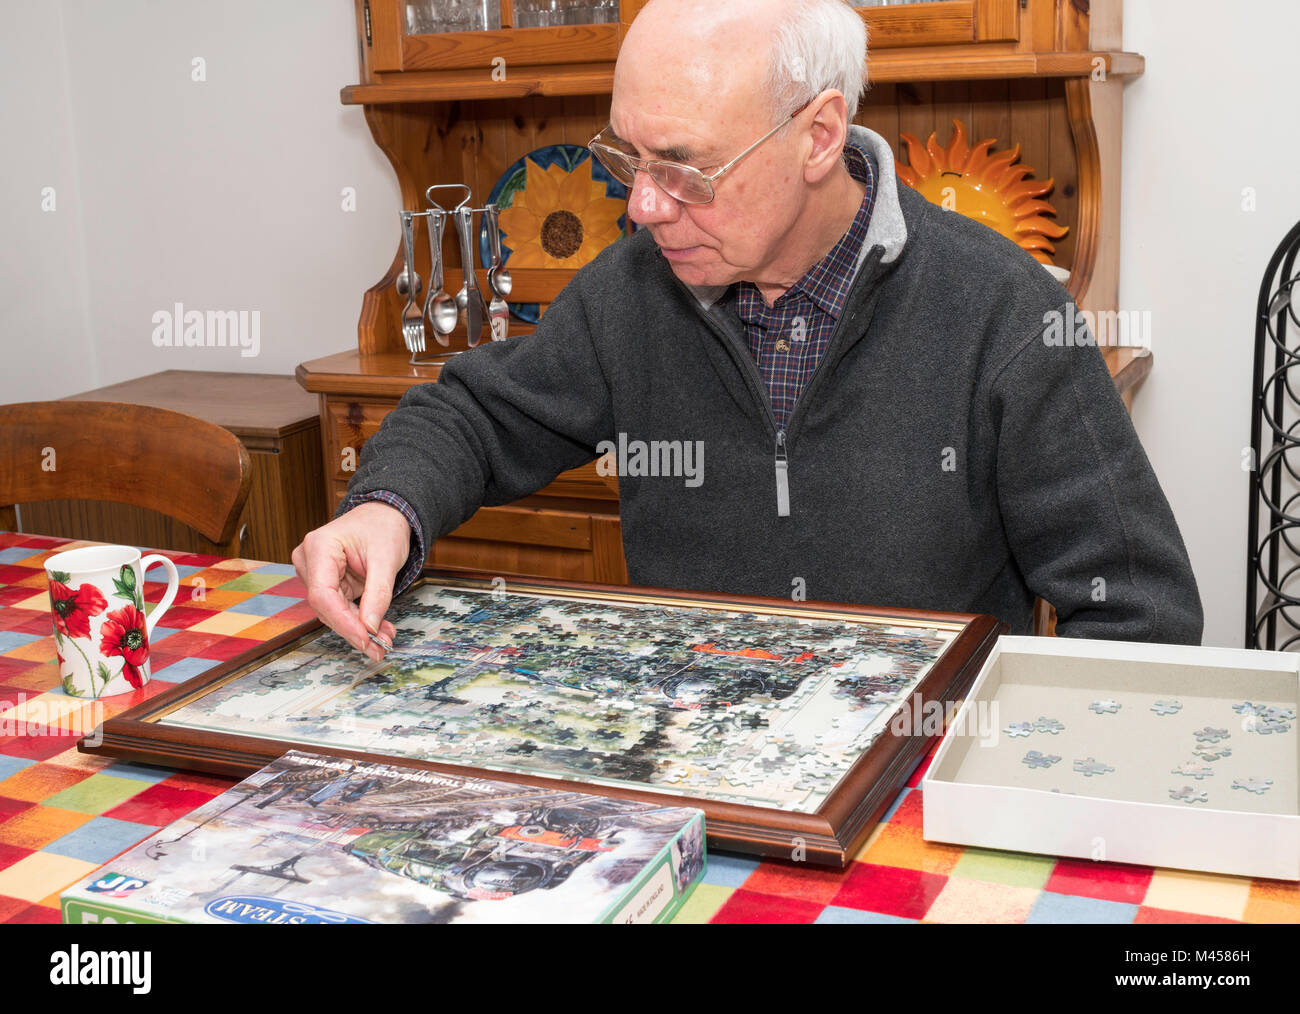 Older man completing jigsaw puzzle Stock Photo